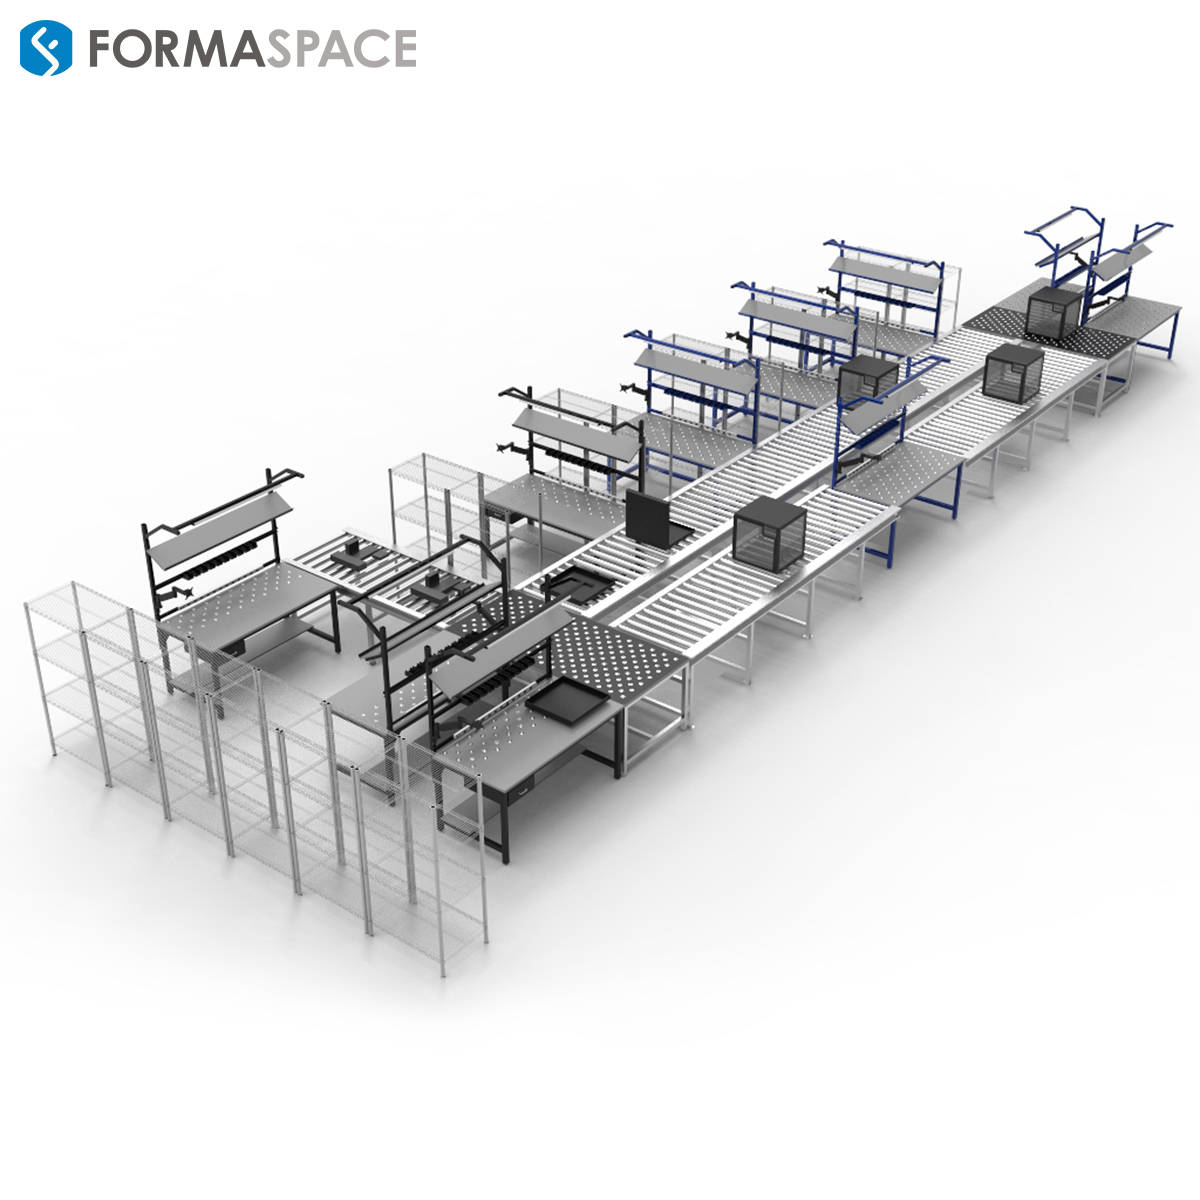 workbenches configured in a production line for efficient component assembly